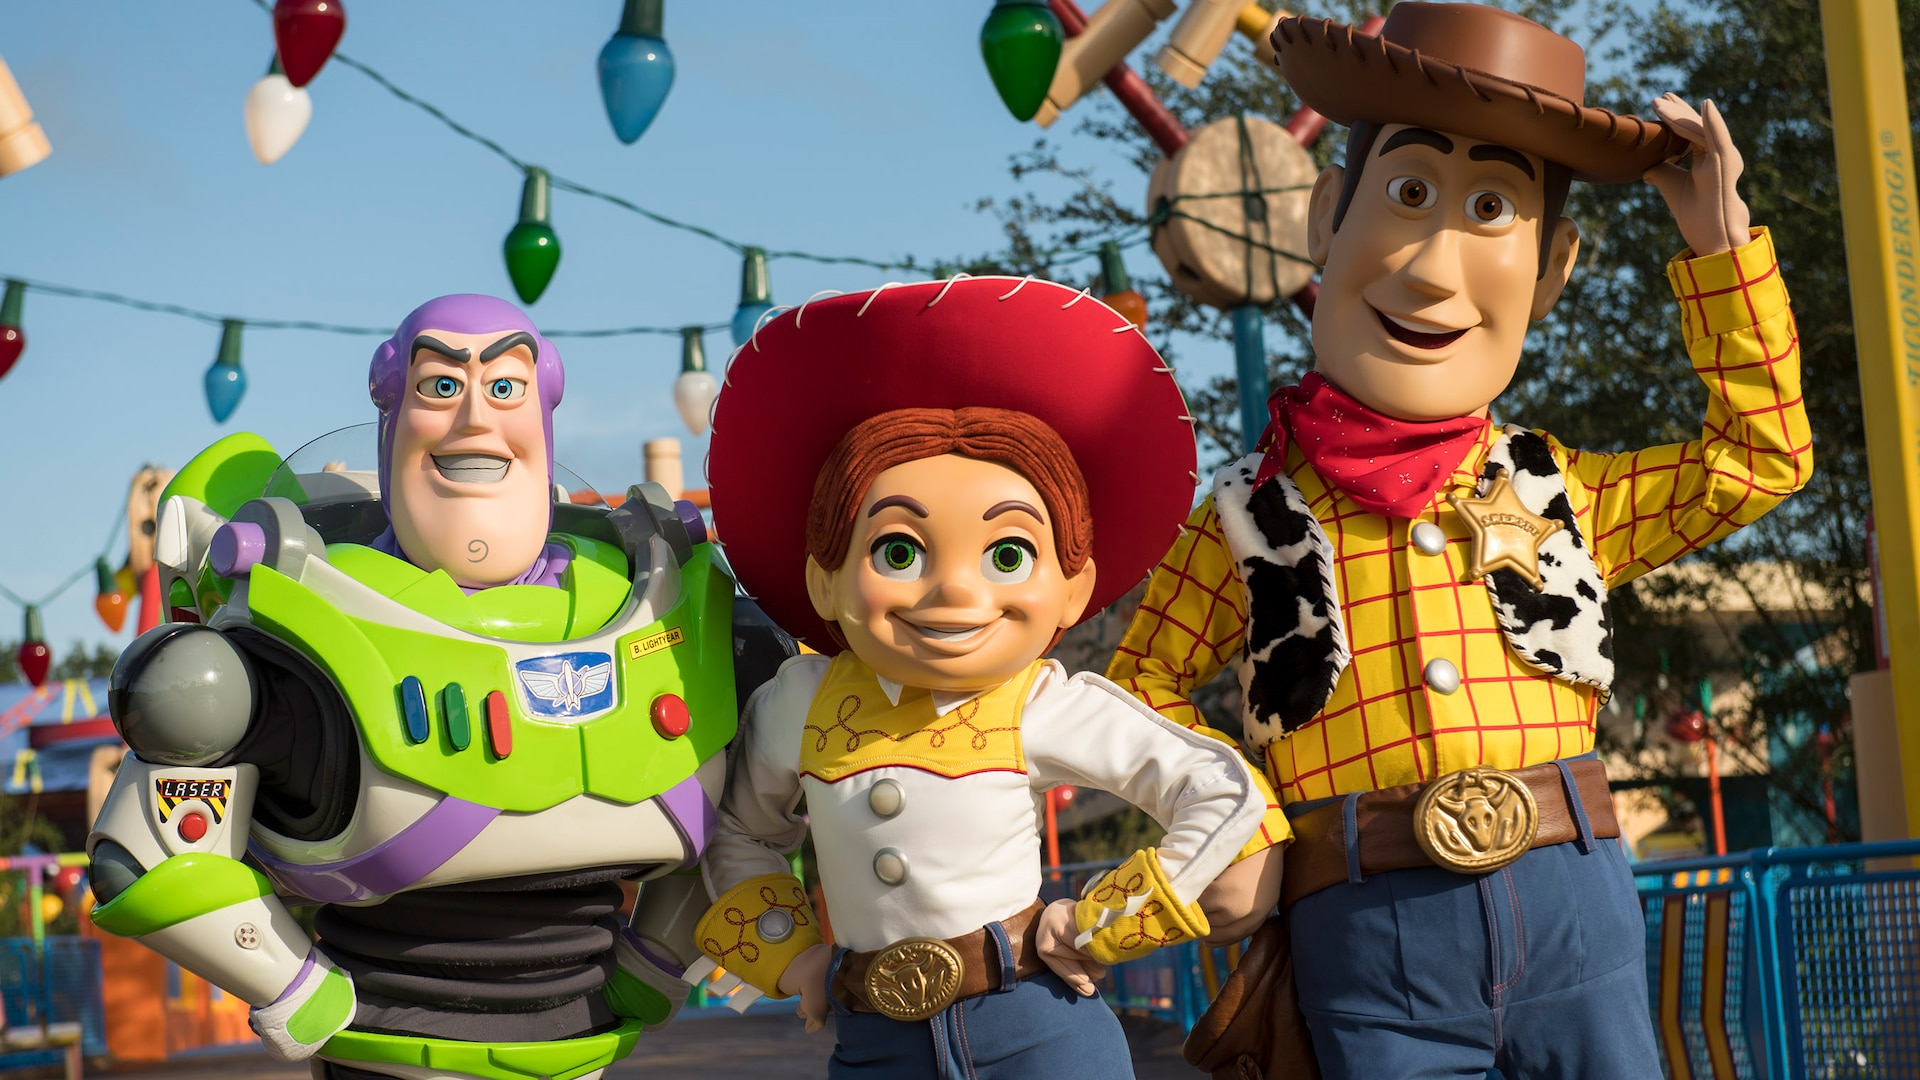 the characters in toy story